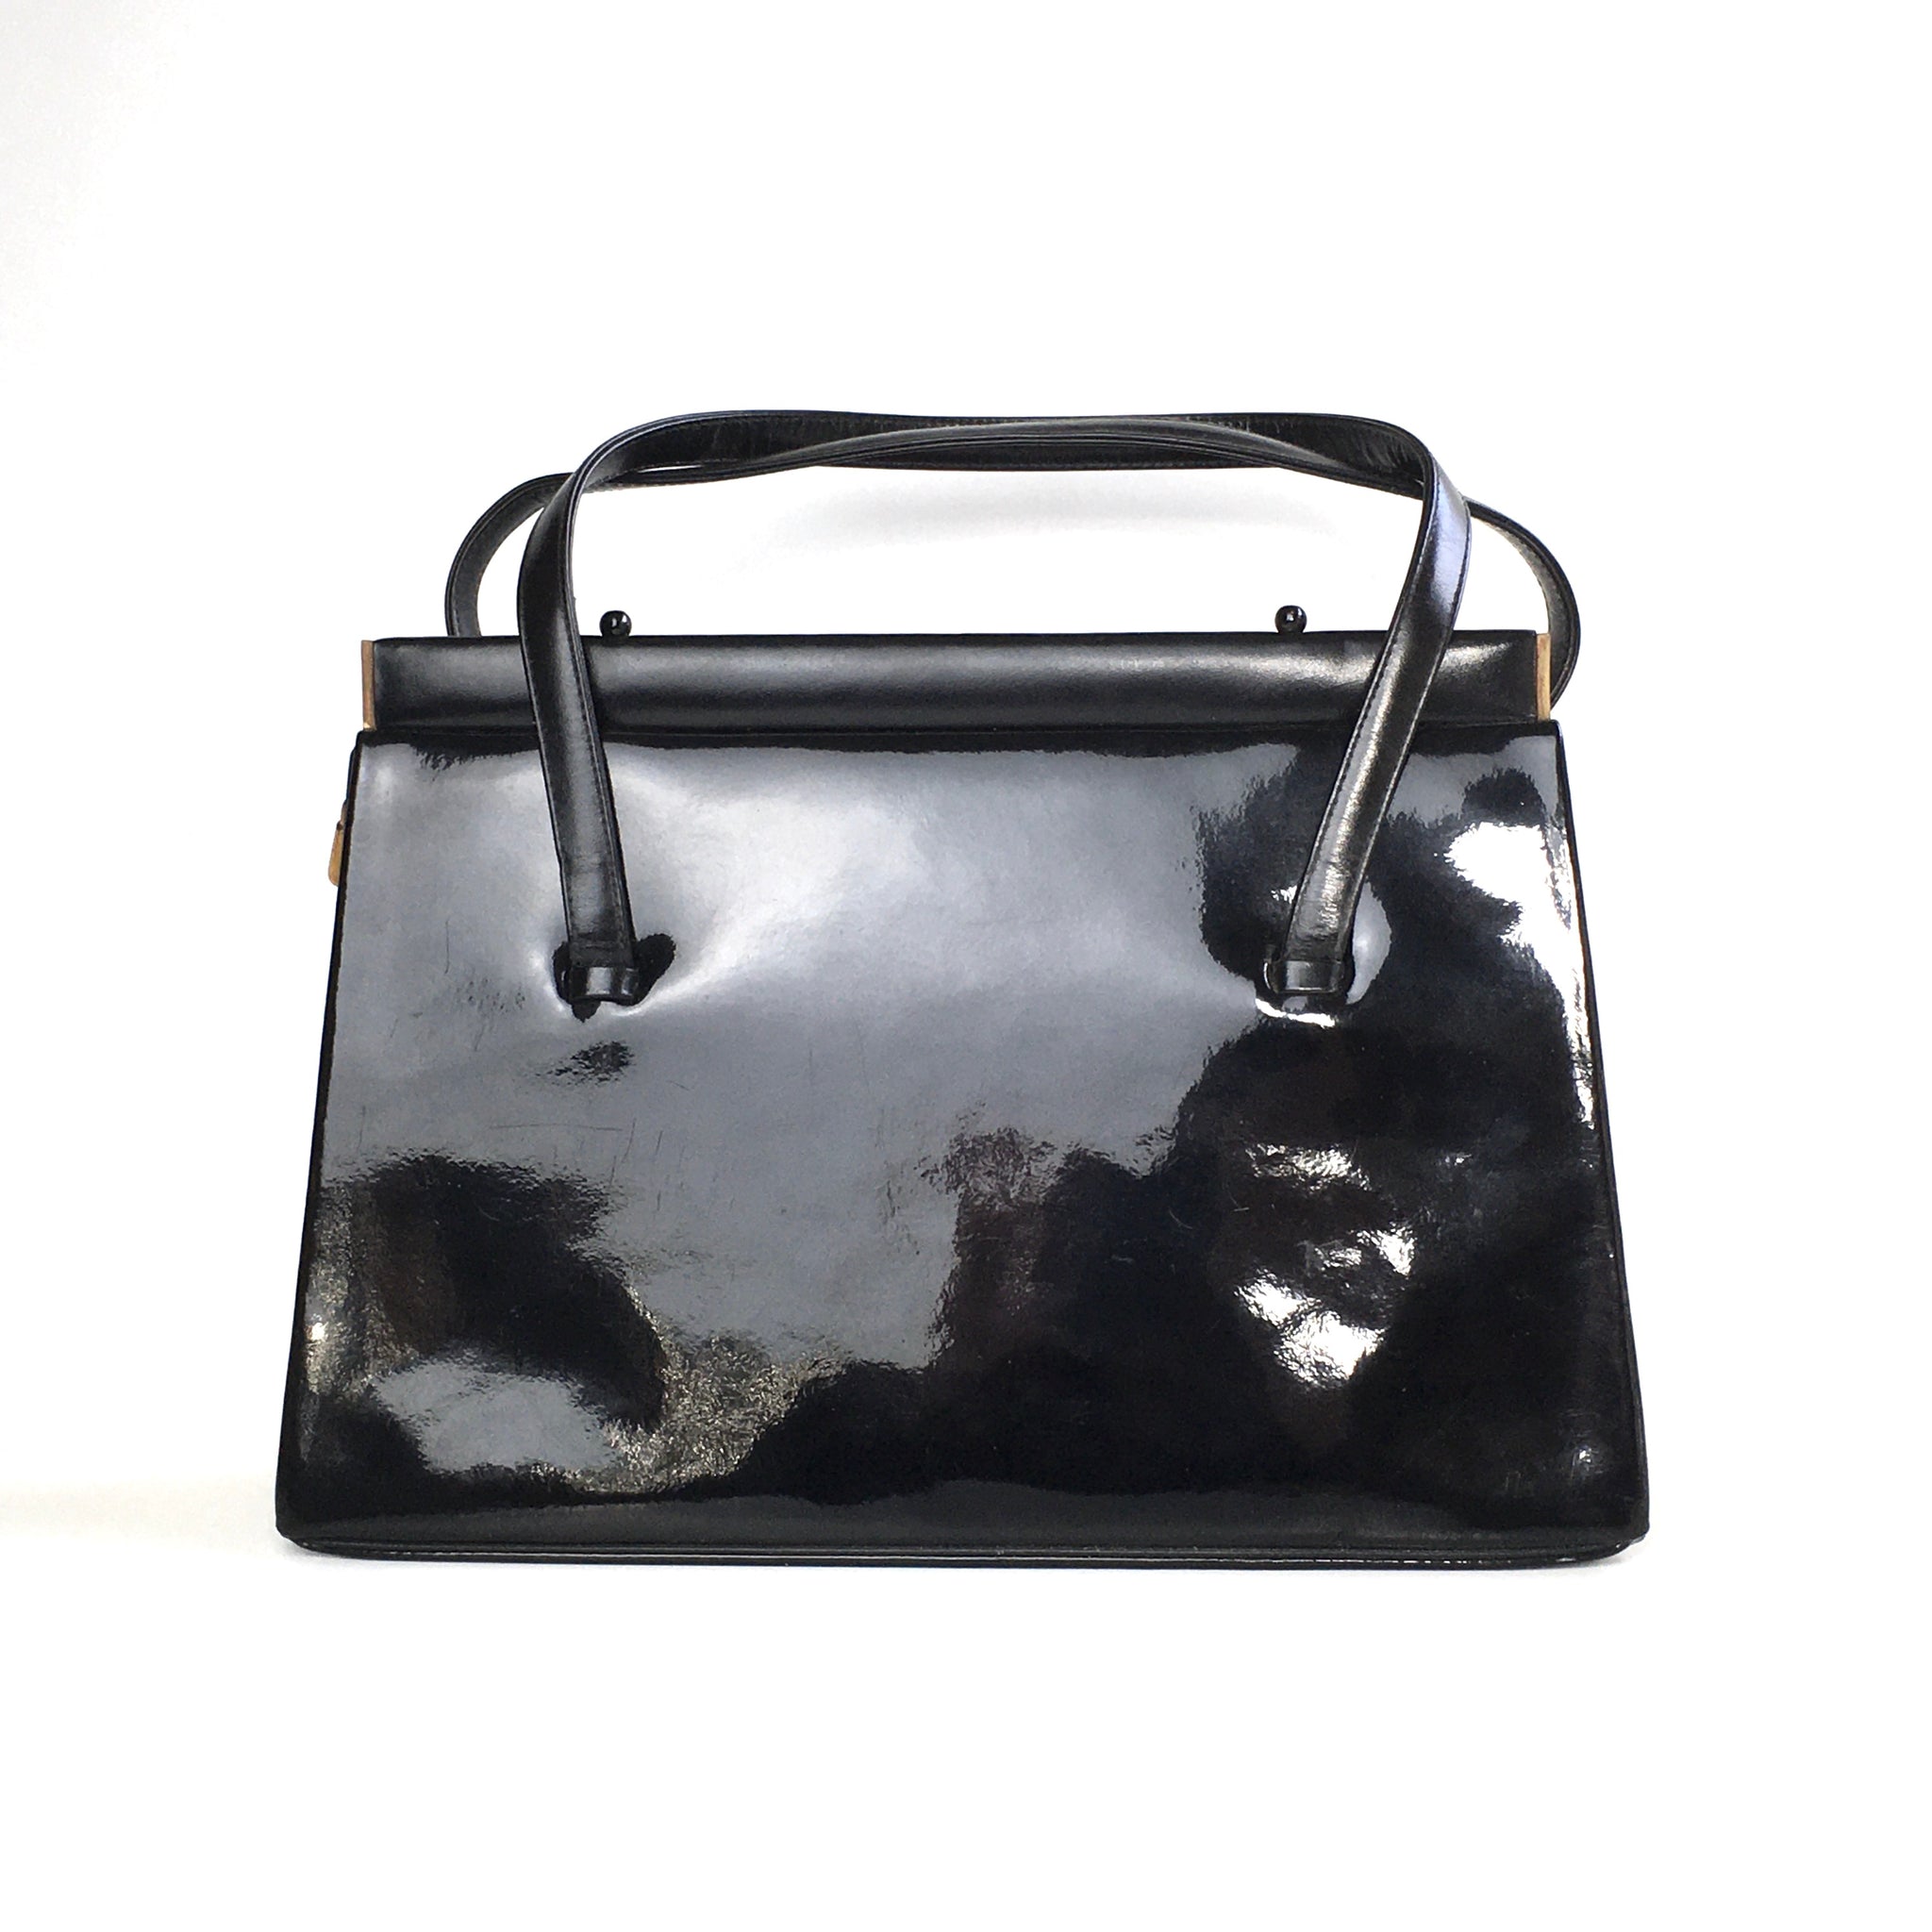 RARE 1950s Black Patent Leather Vintage Gucci Bag With Red Lining